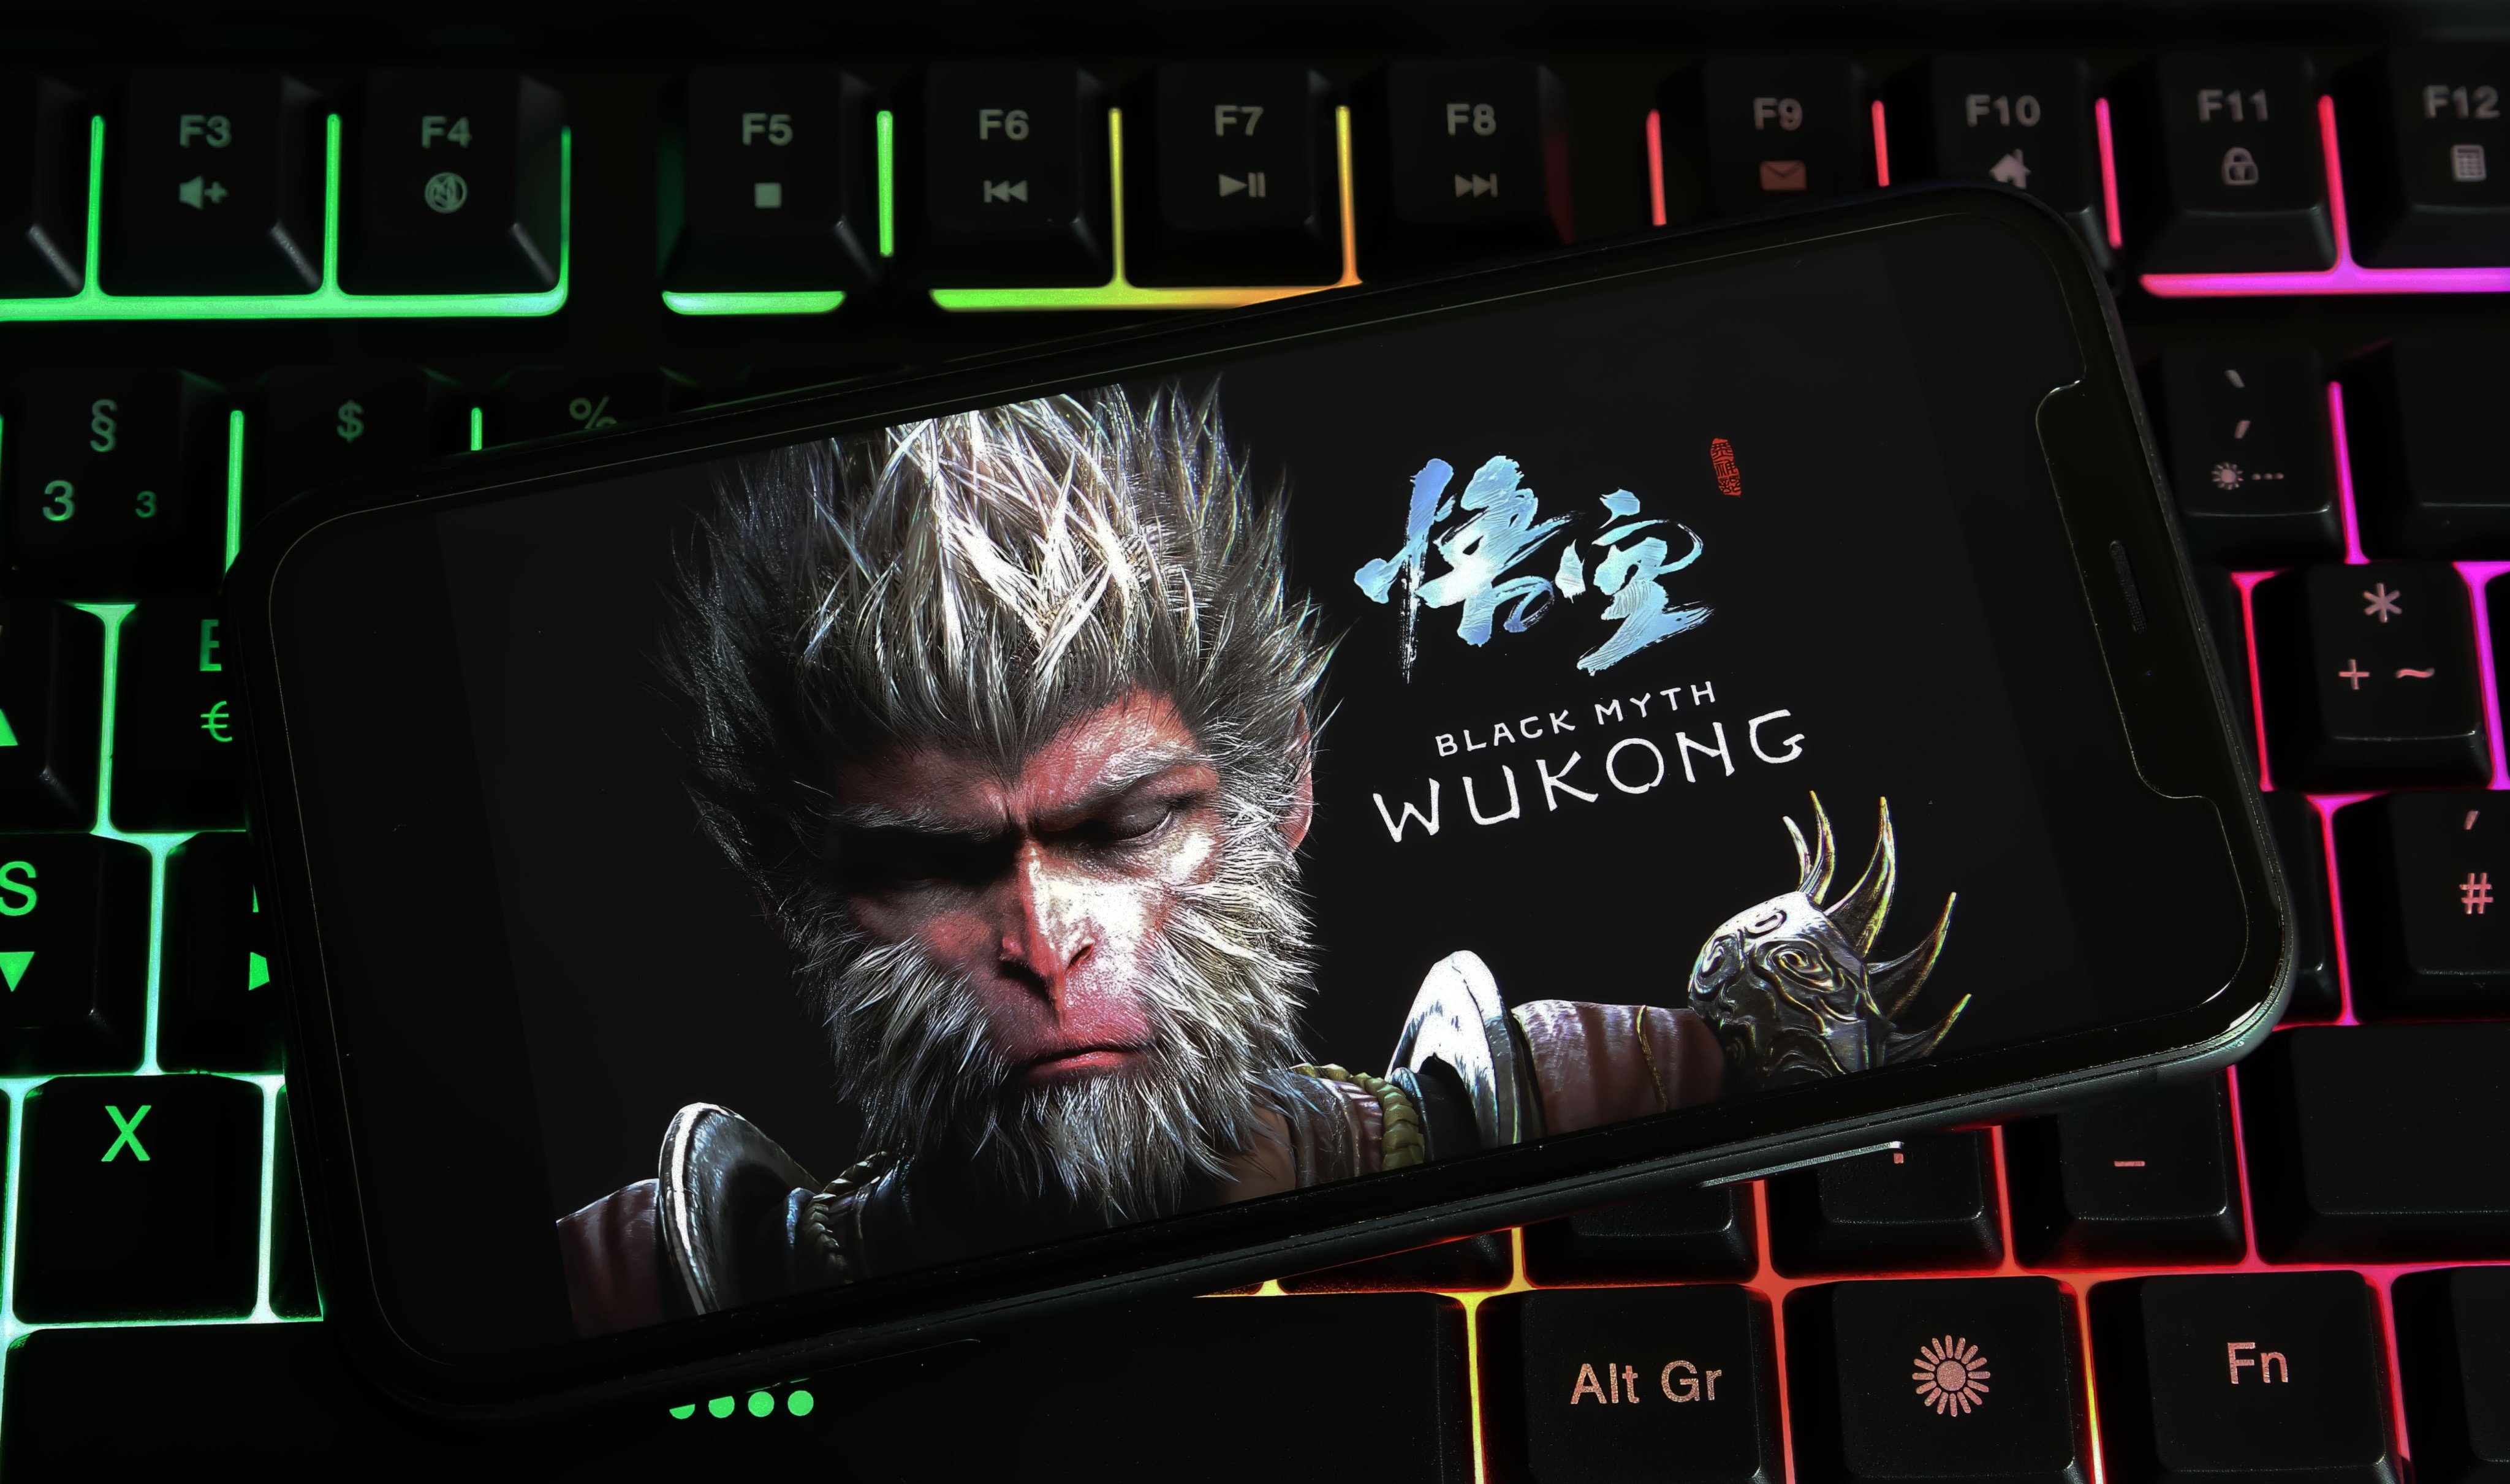 Action role-playing video game Black Myth: Wukong,  developed by Tencent Holdings-backed Game Science, is set for release on August 20. Photo: Shutterstock